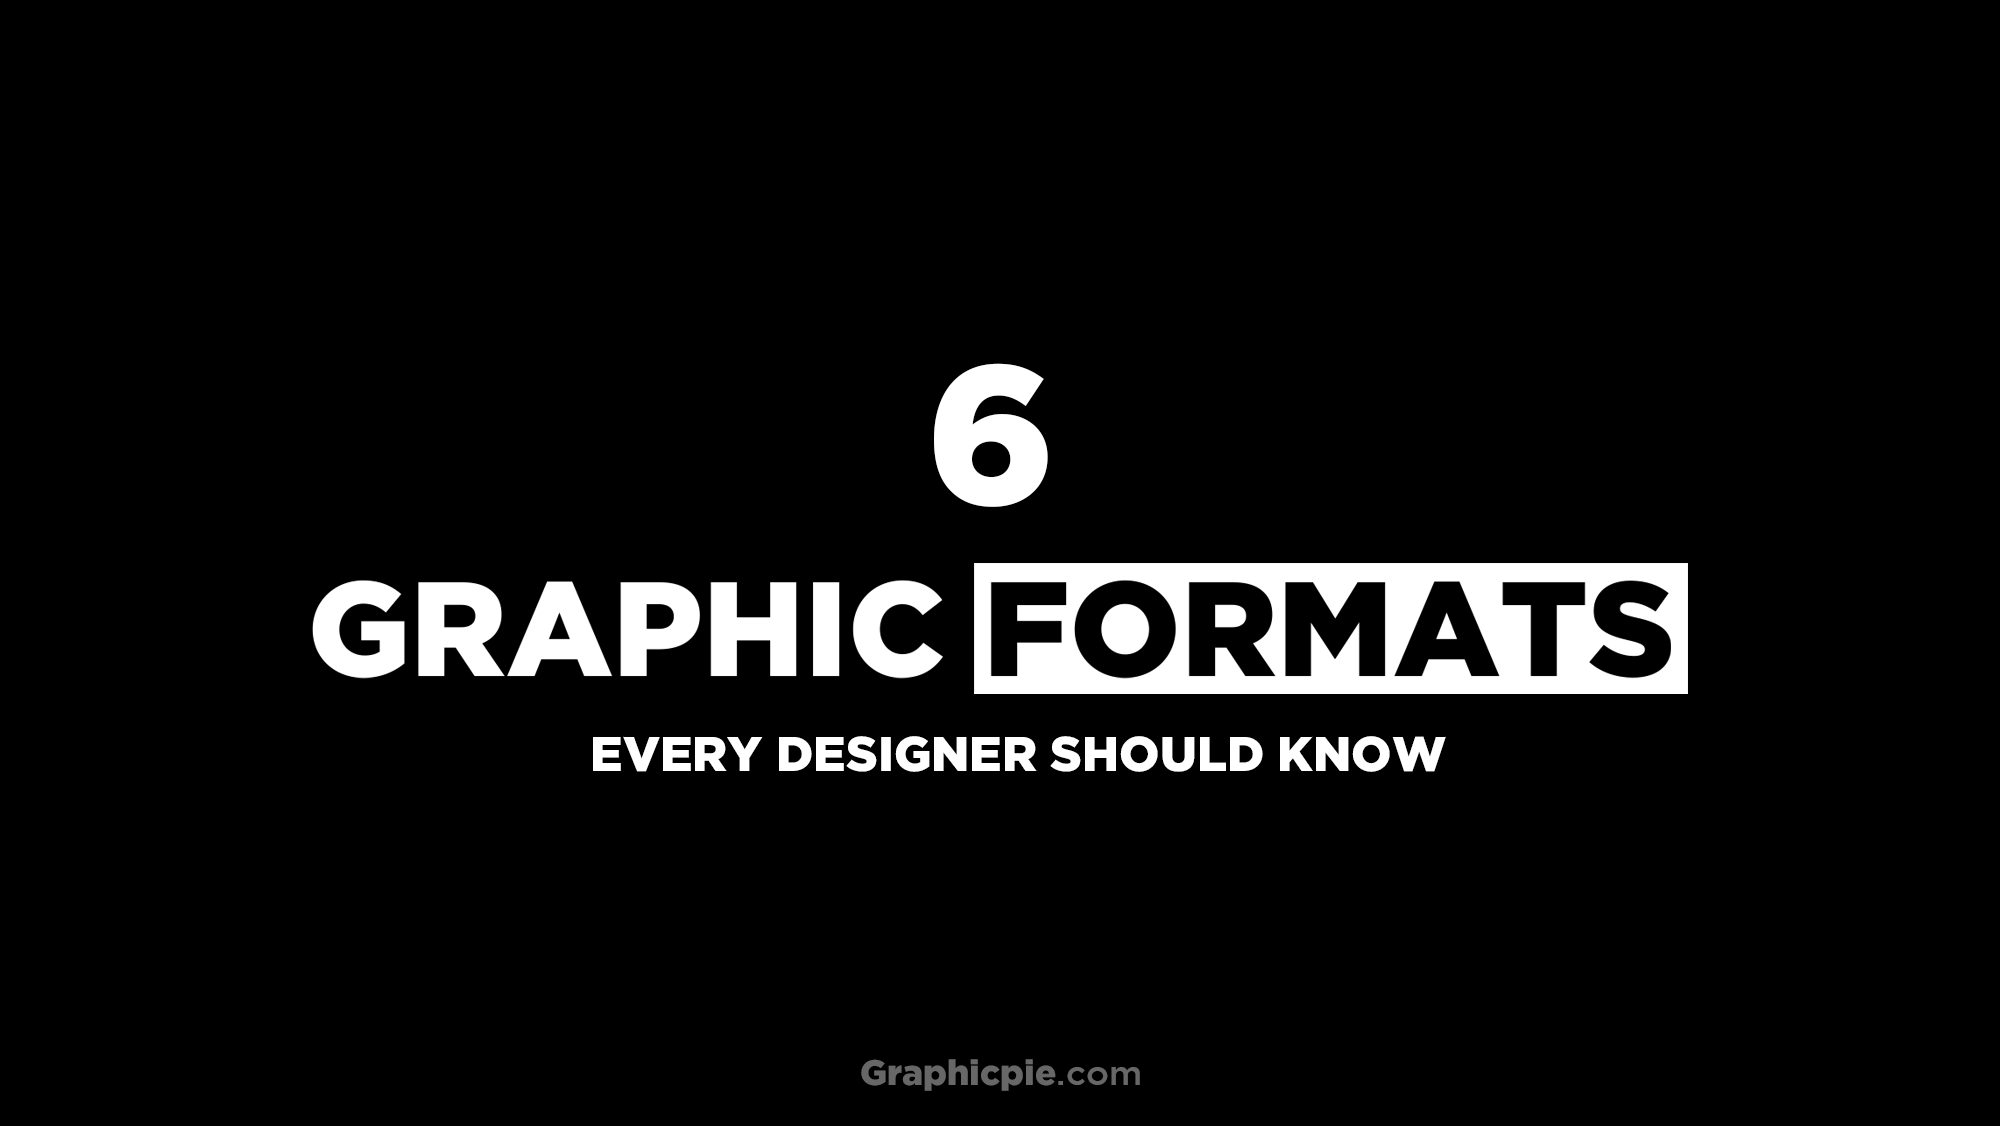 Graphic Formats Every Designer Should Know - Graphic Pie